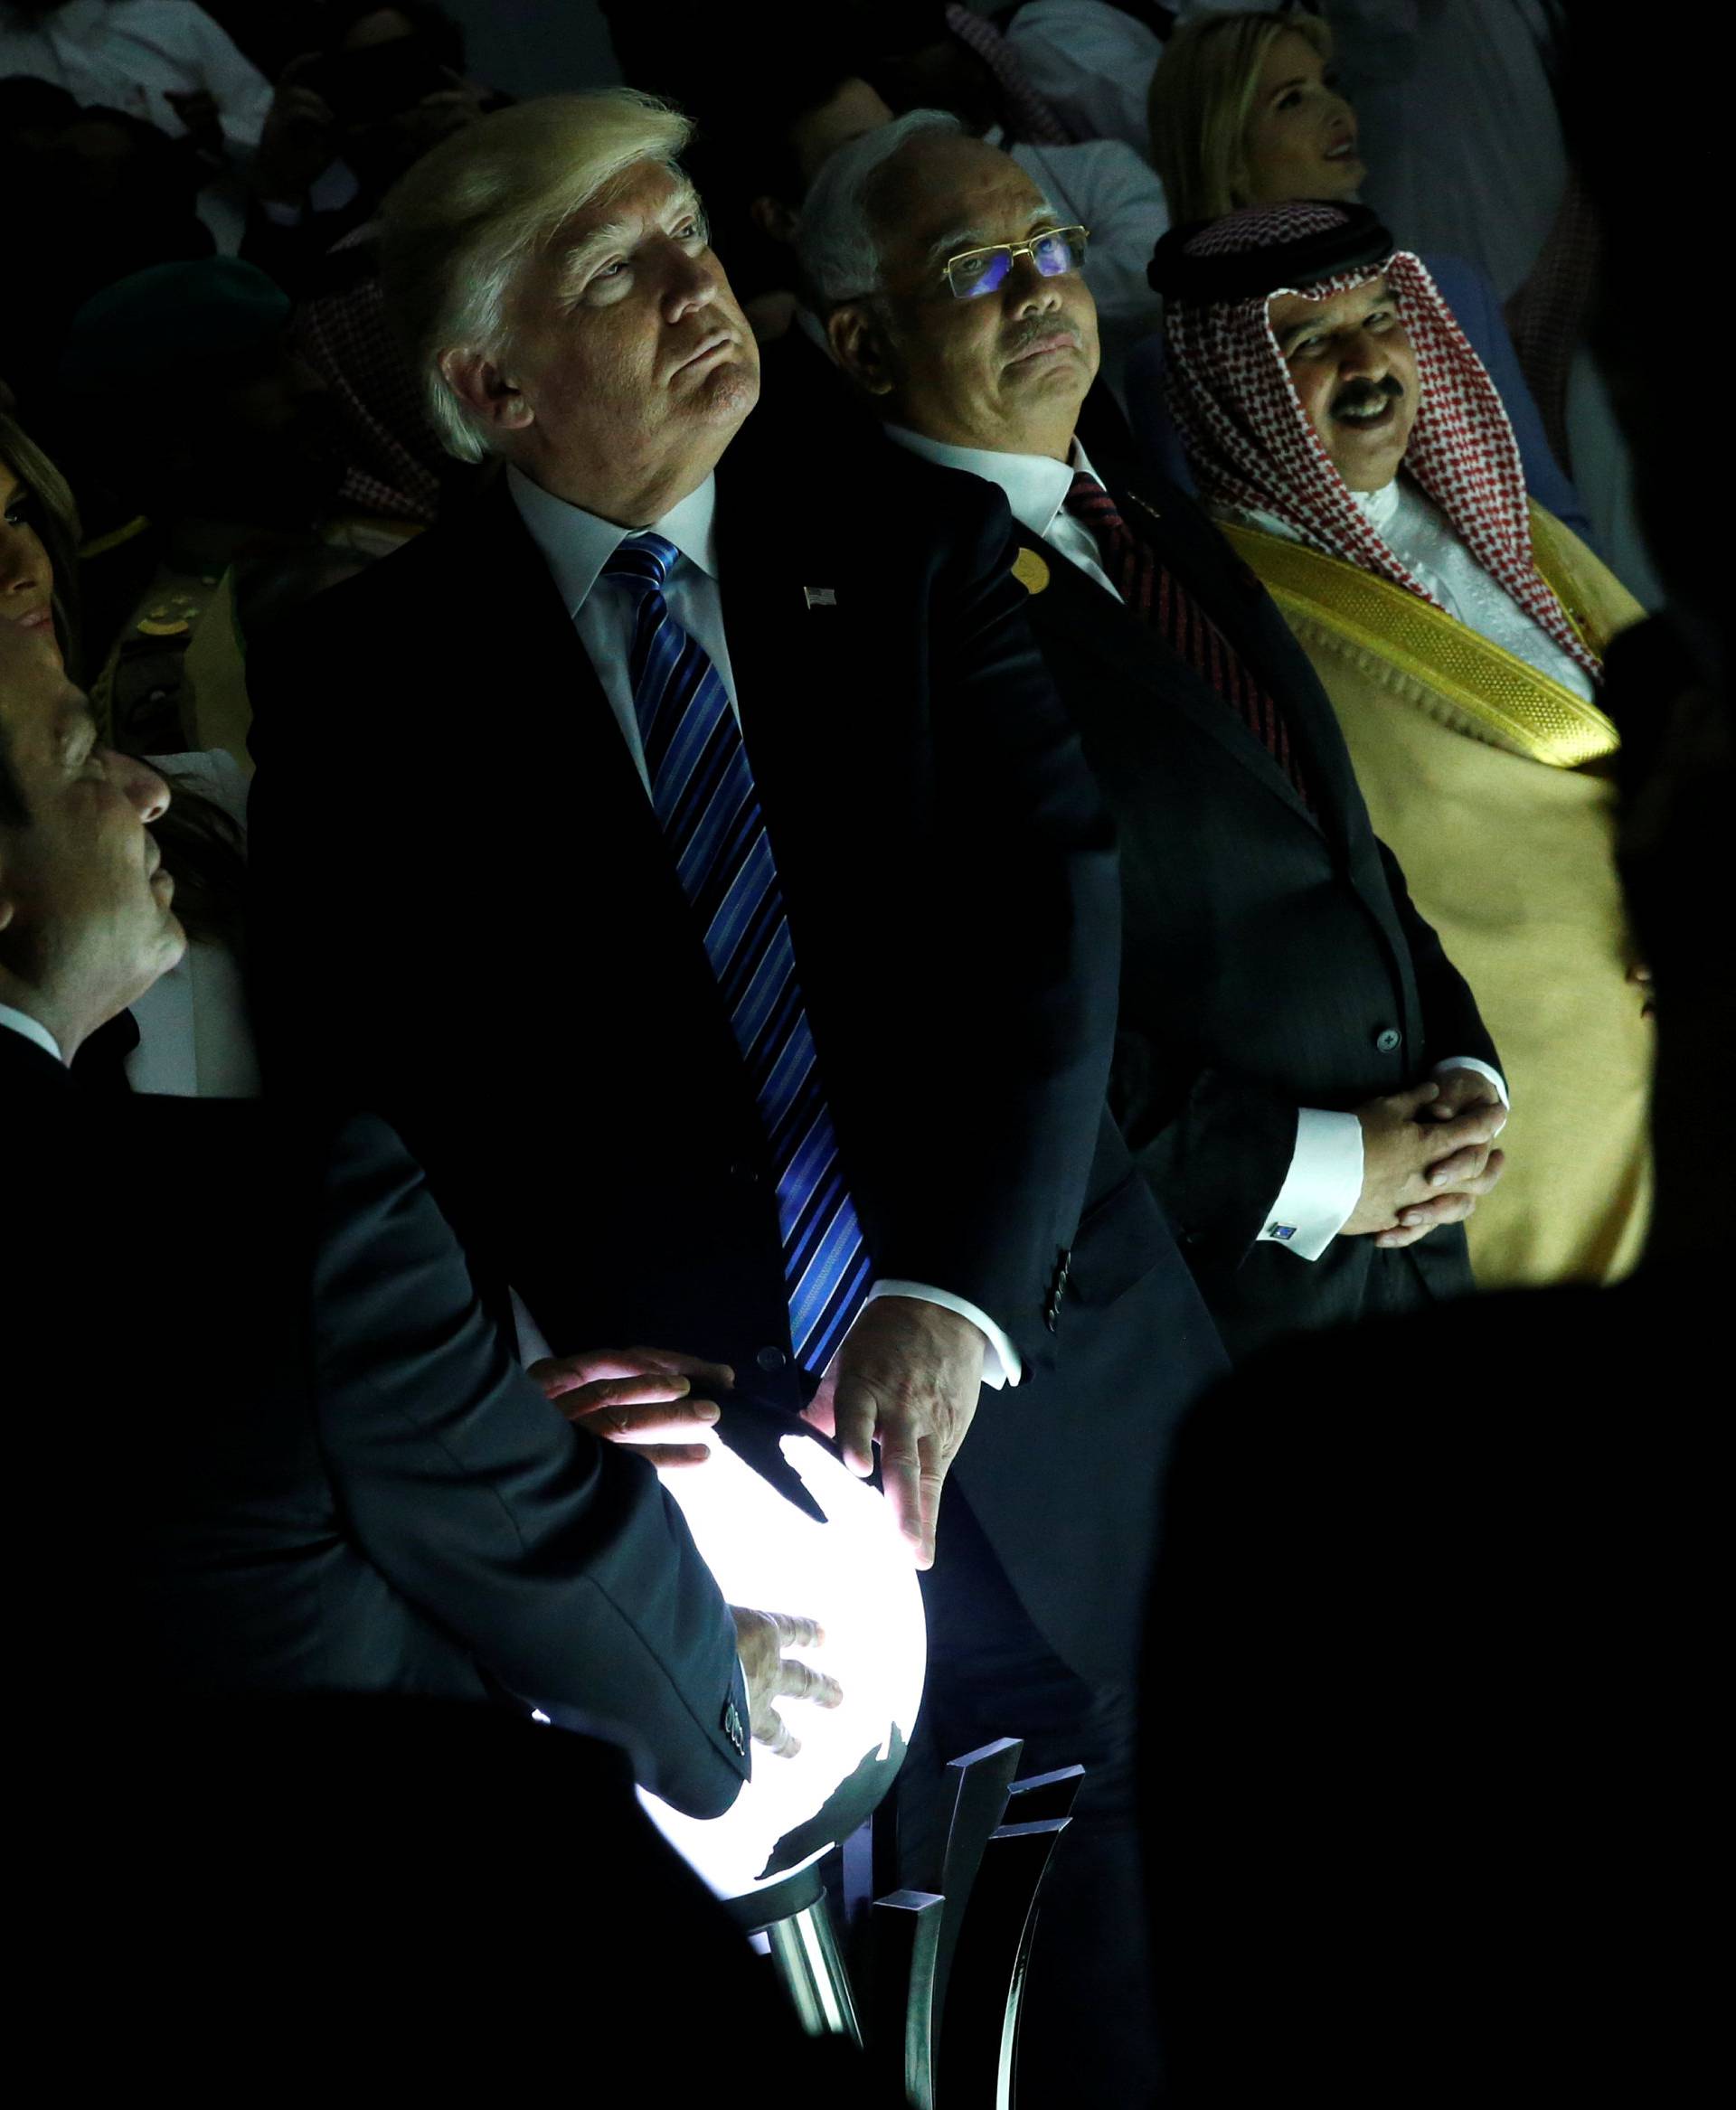 Trump and other leaders react to a wall of computer screens coming online as they tour the Global Center for Combatting Extremist Ideology in Riyadh